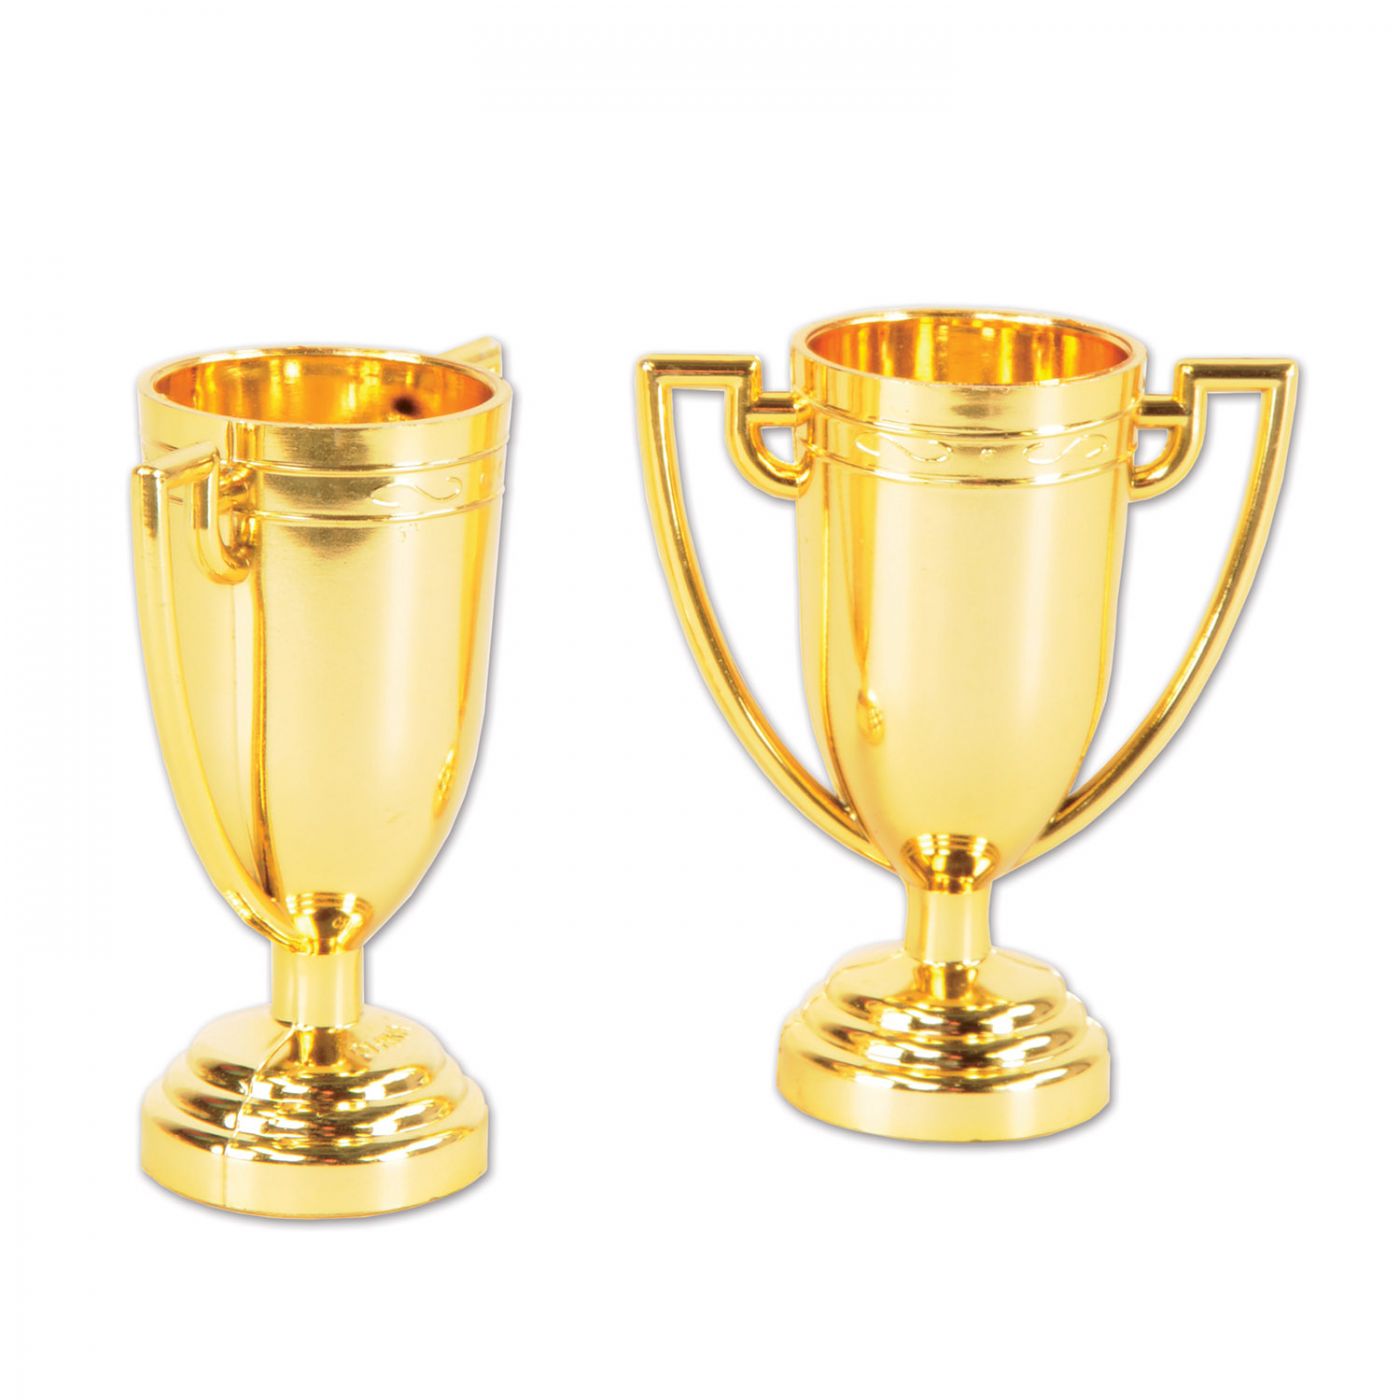 Trophy Cups image